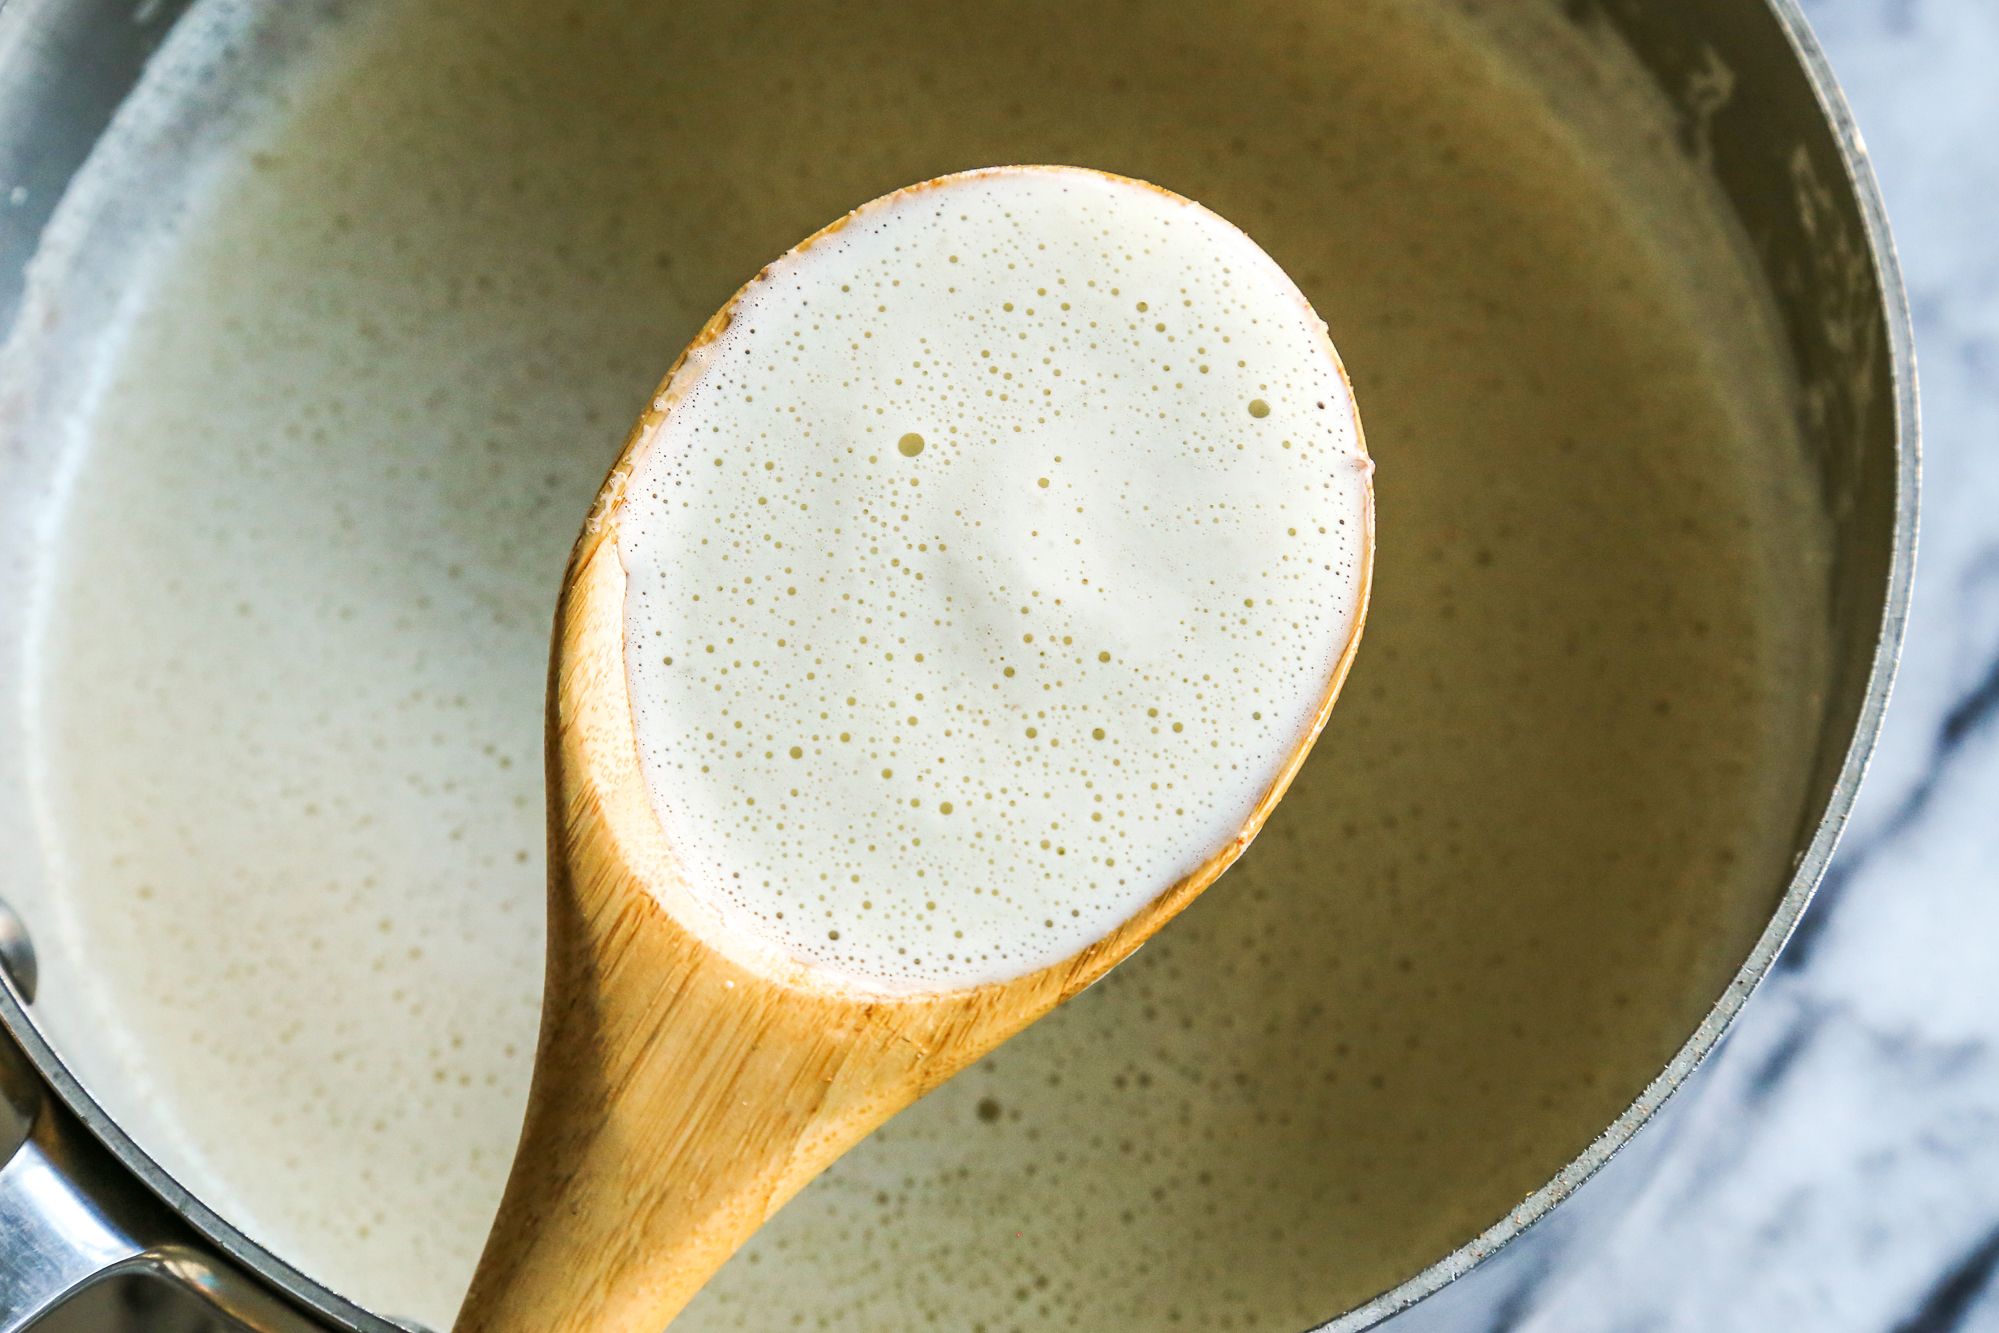 Homemade Eggnog The Right Way! - FeelGoodFoodie